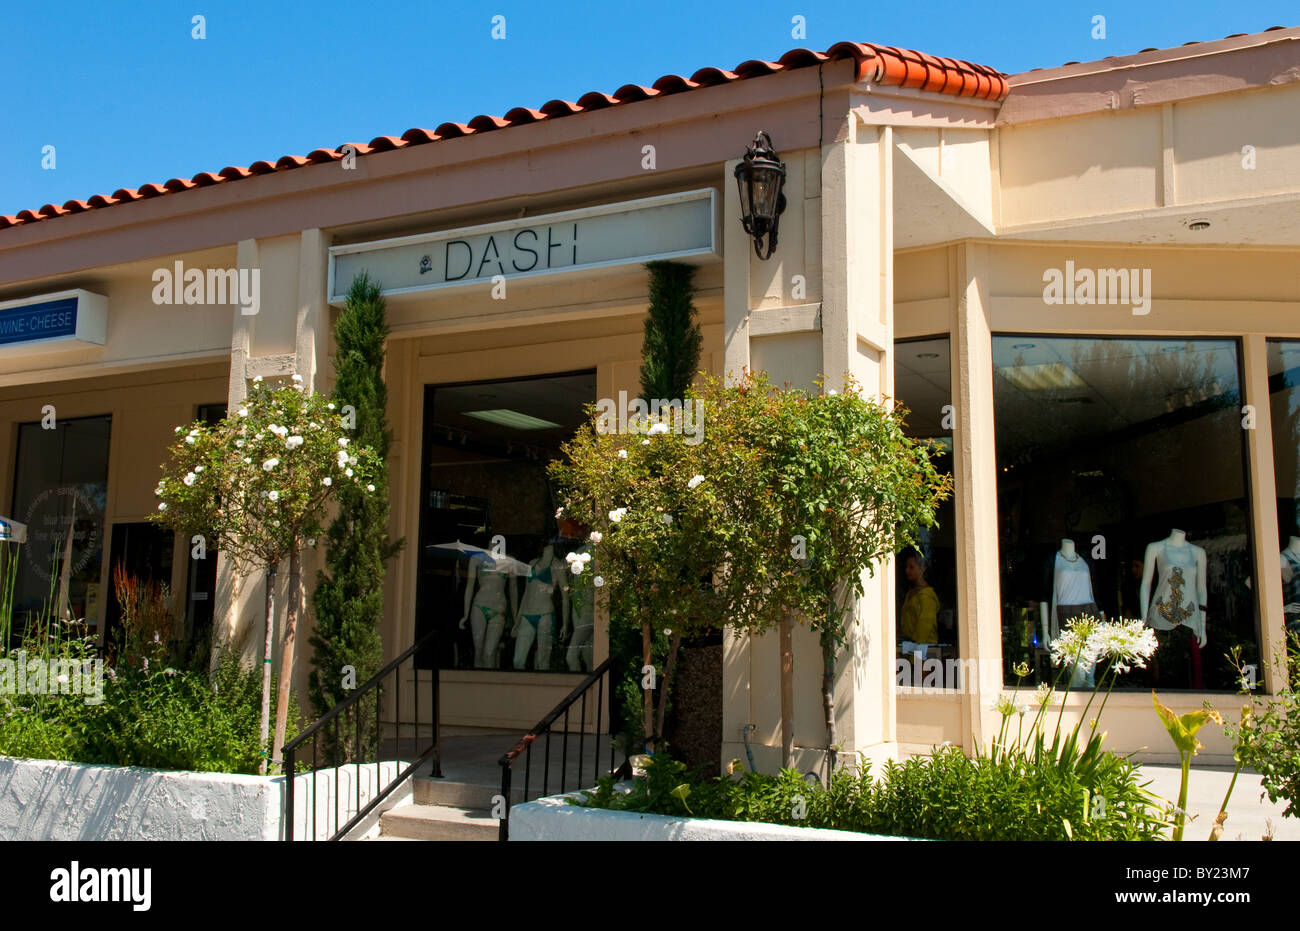 https://c8.alamy.com/comp/BY23M7/famous-dash-boutique-shop-in-calabasas-california-owned-by-kim-kardashian-BY23M7.jpg